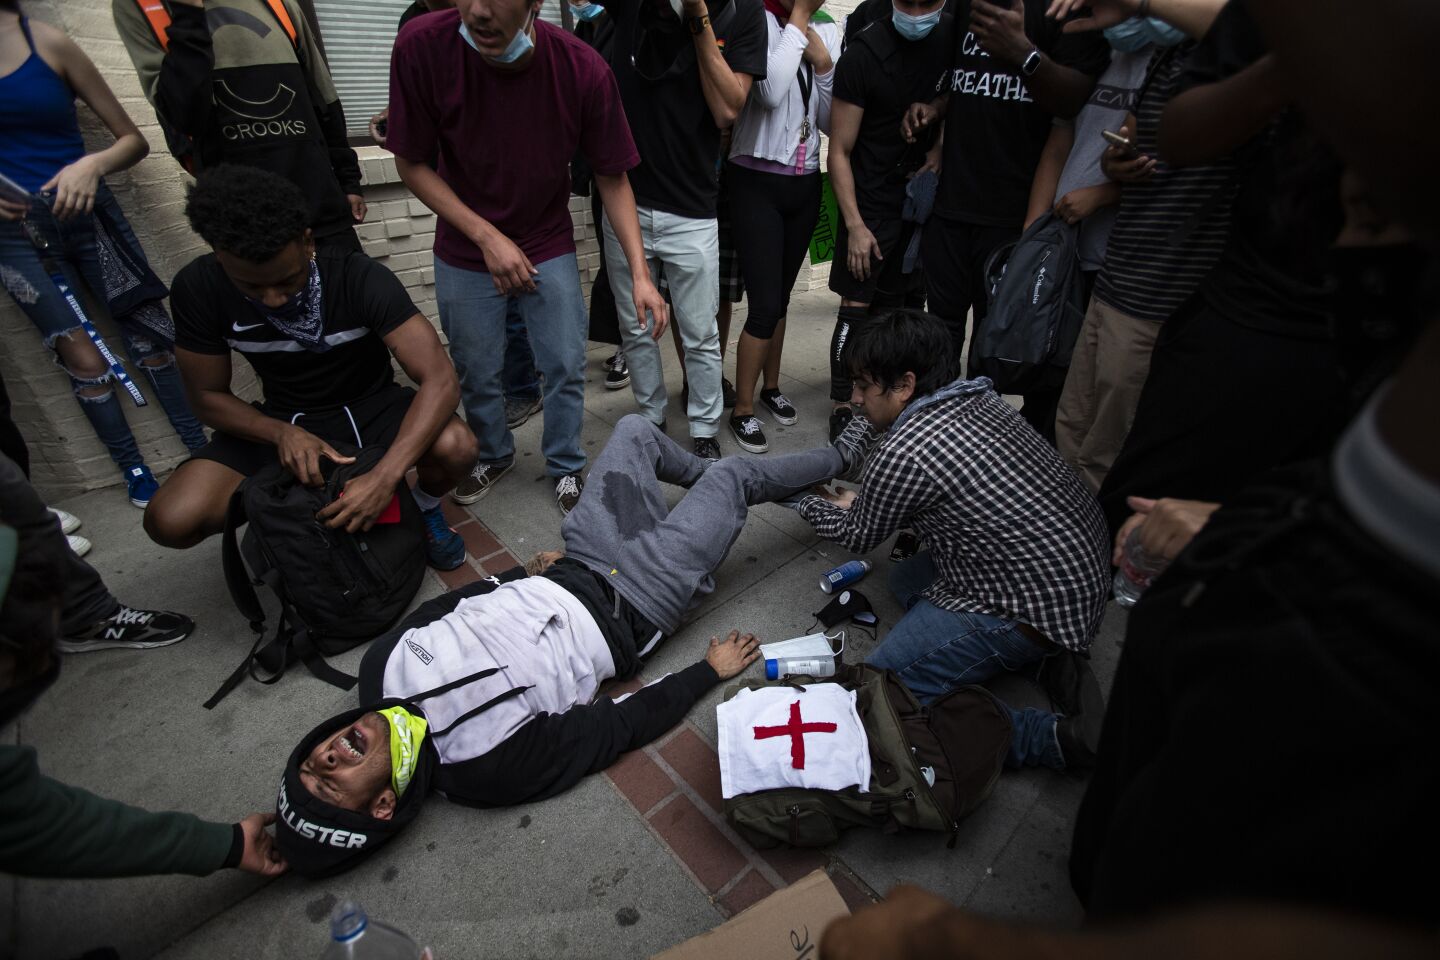 A demonstrator, injured while trying to flee nonlethal rounds, lies on the ground in Riverside.